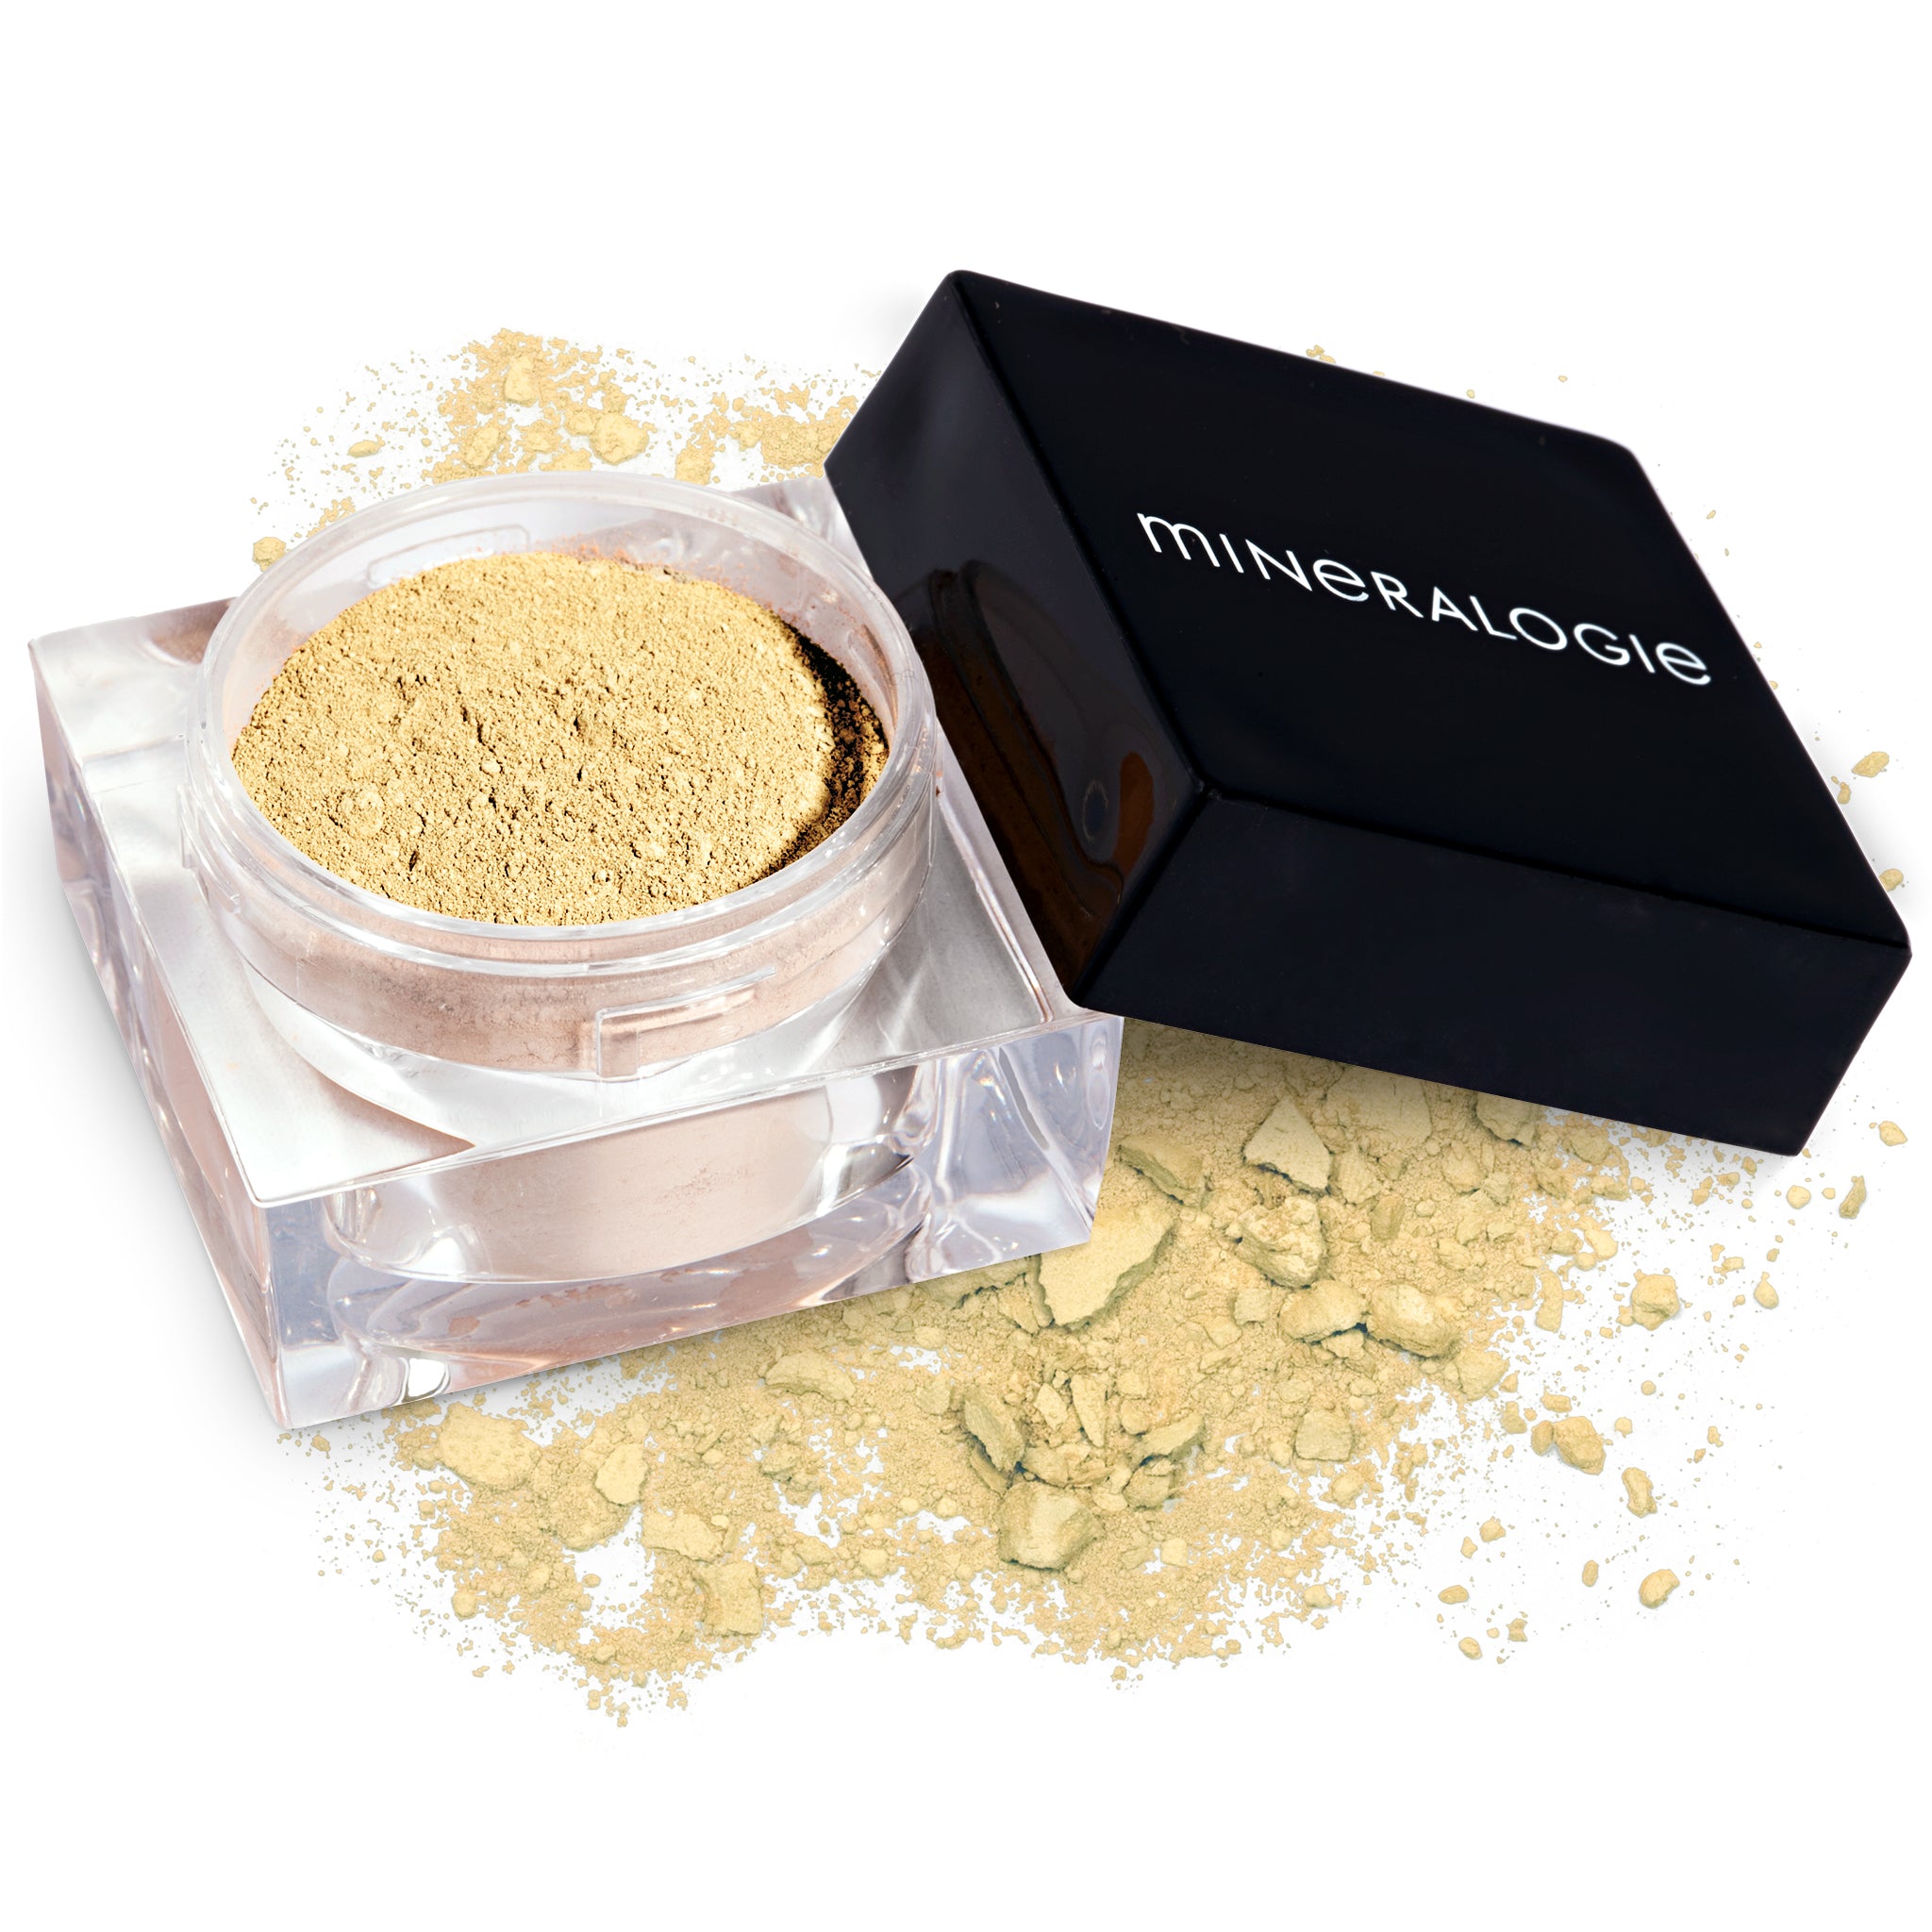 Loose Mineral Foundation by Minerologie